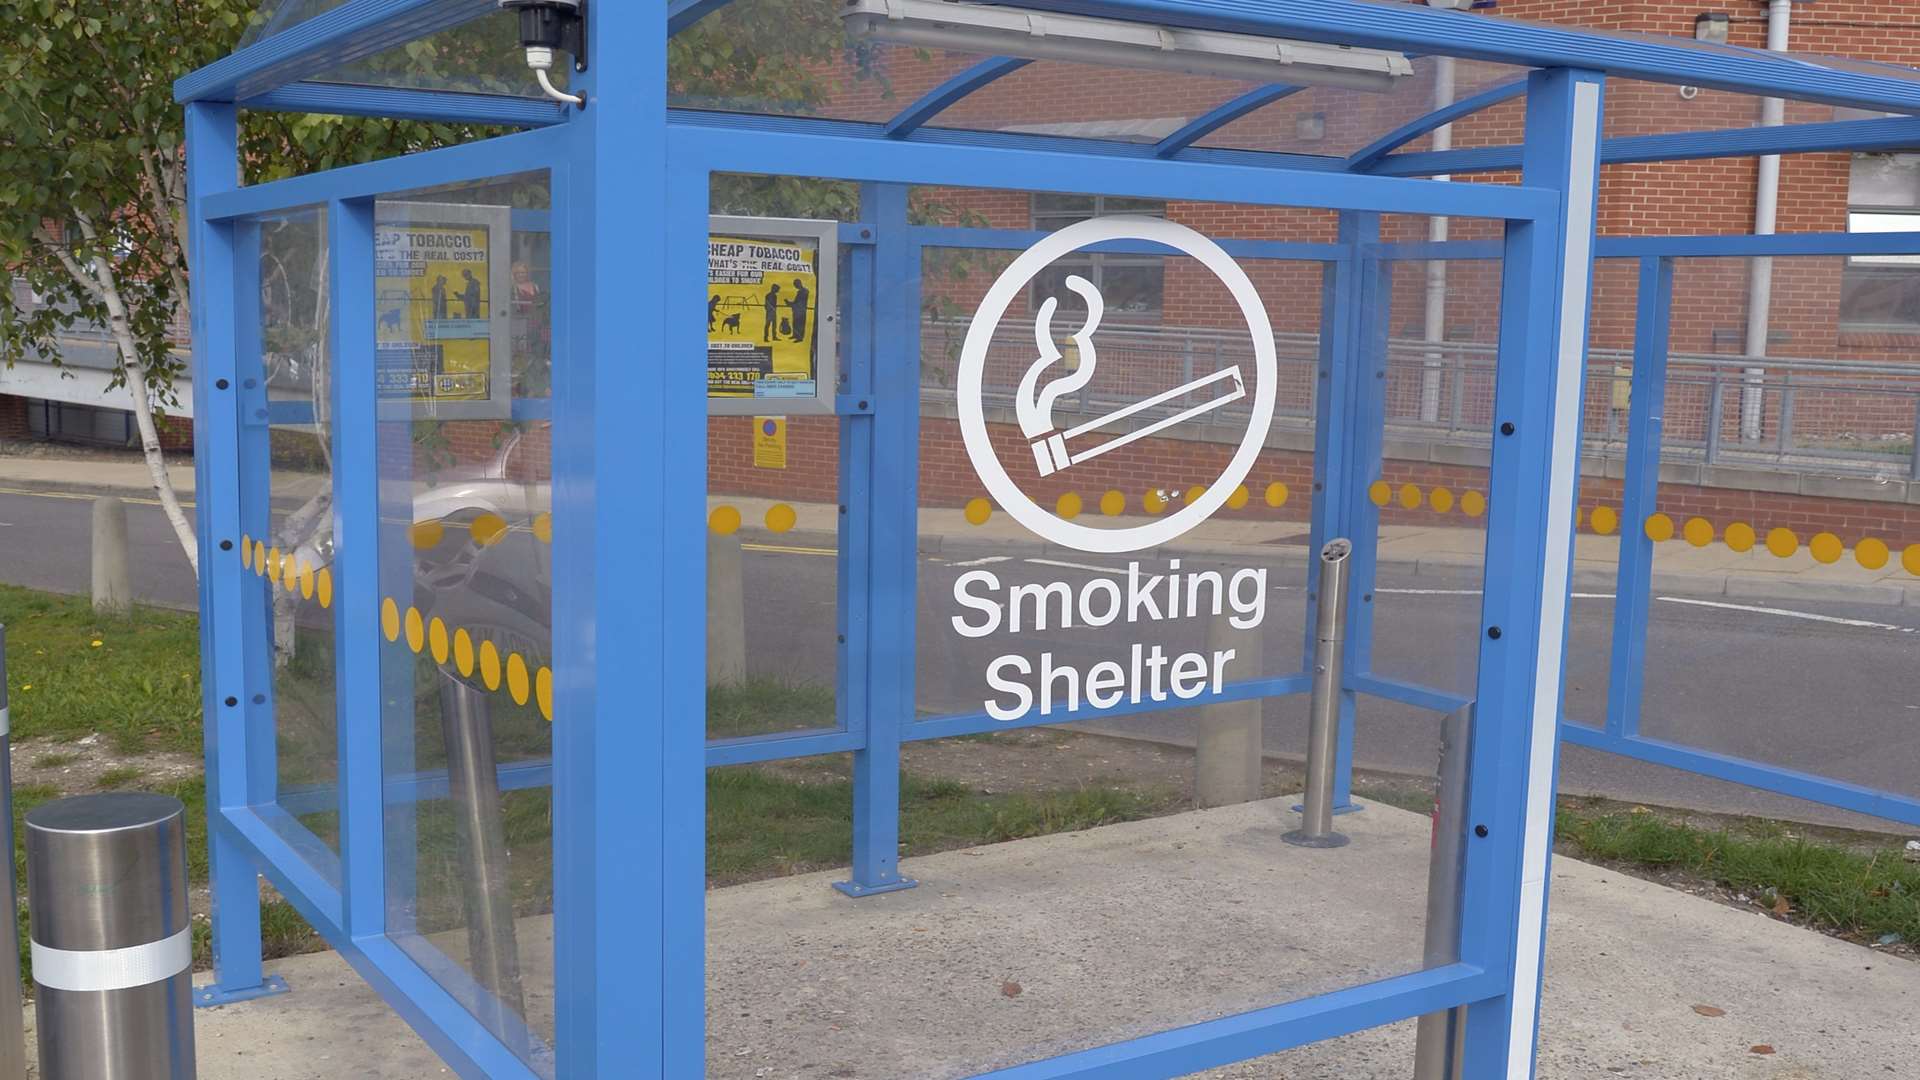 Medway Maritime Hospital site is going smokefree in October